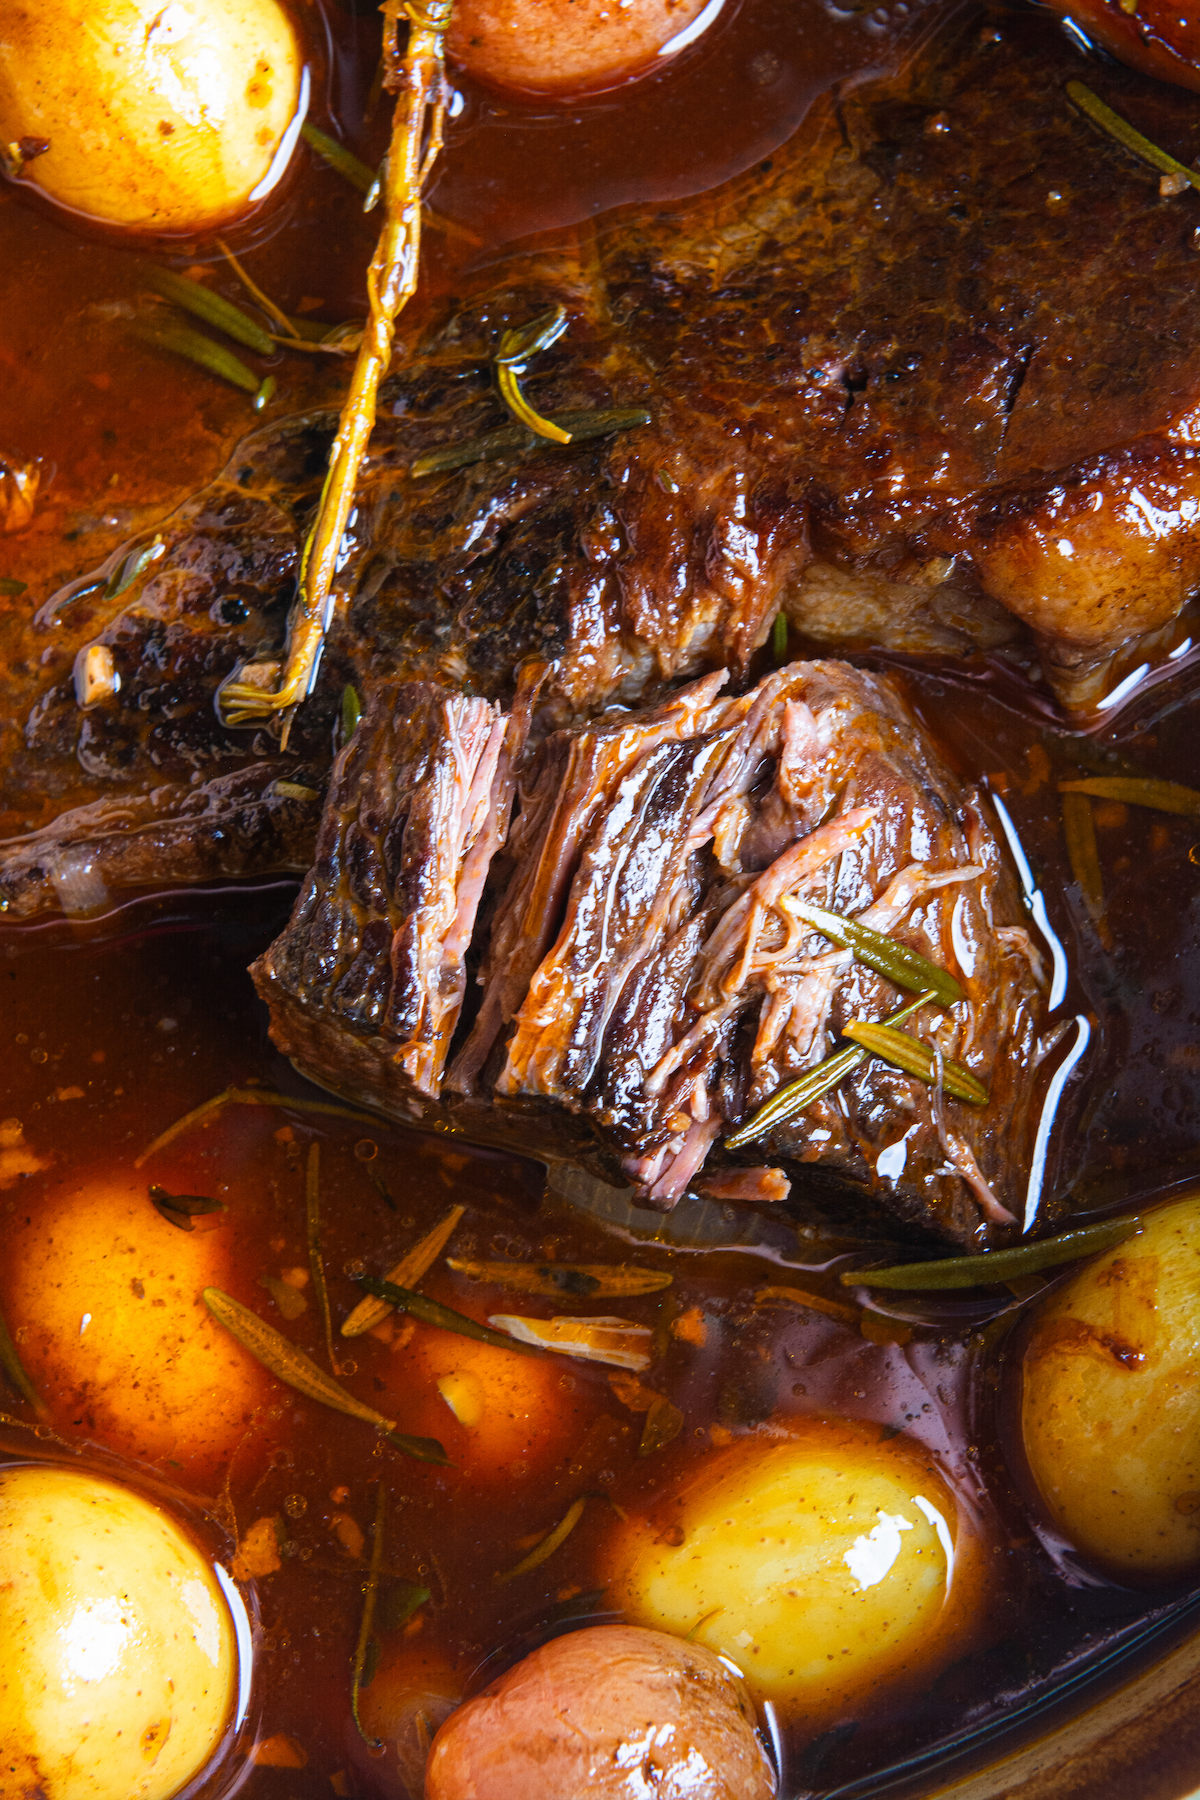 A hot pot roast, baby potatoes, and carrots, cooked in beef stock and wine.